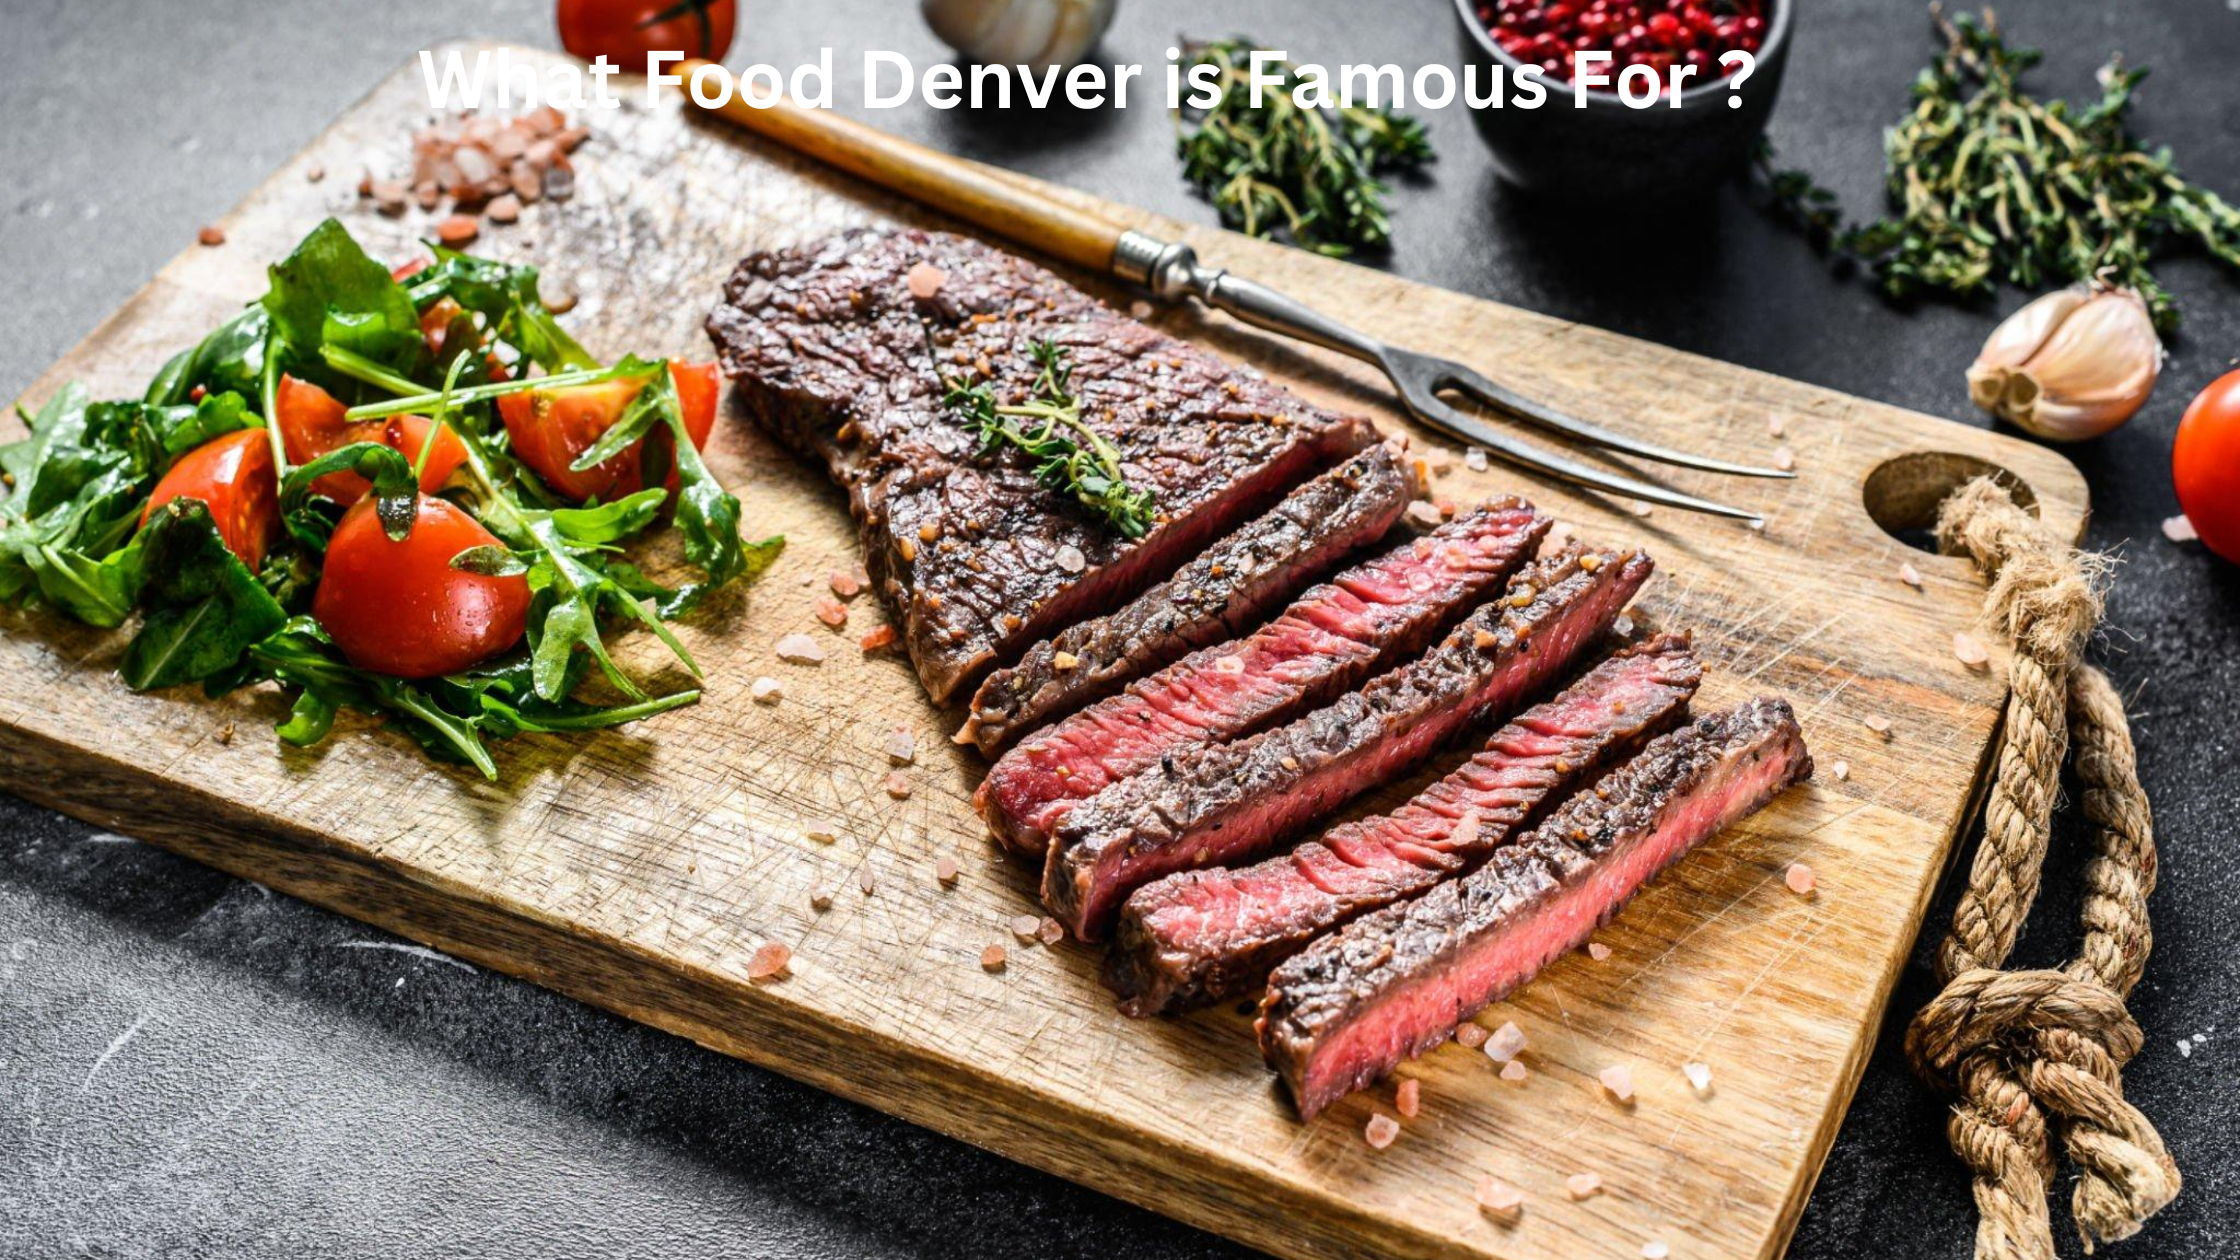 What Food Denver is Famous For